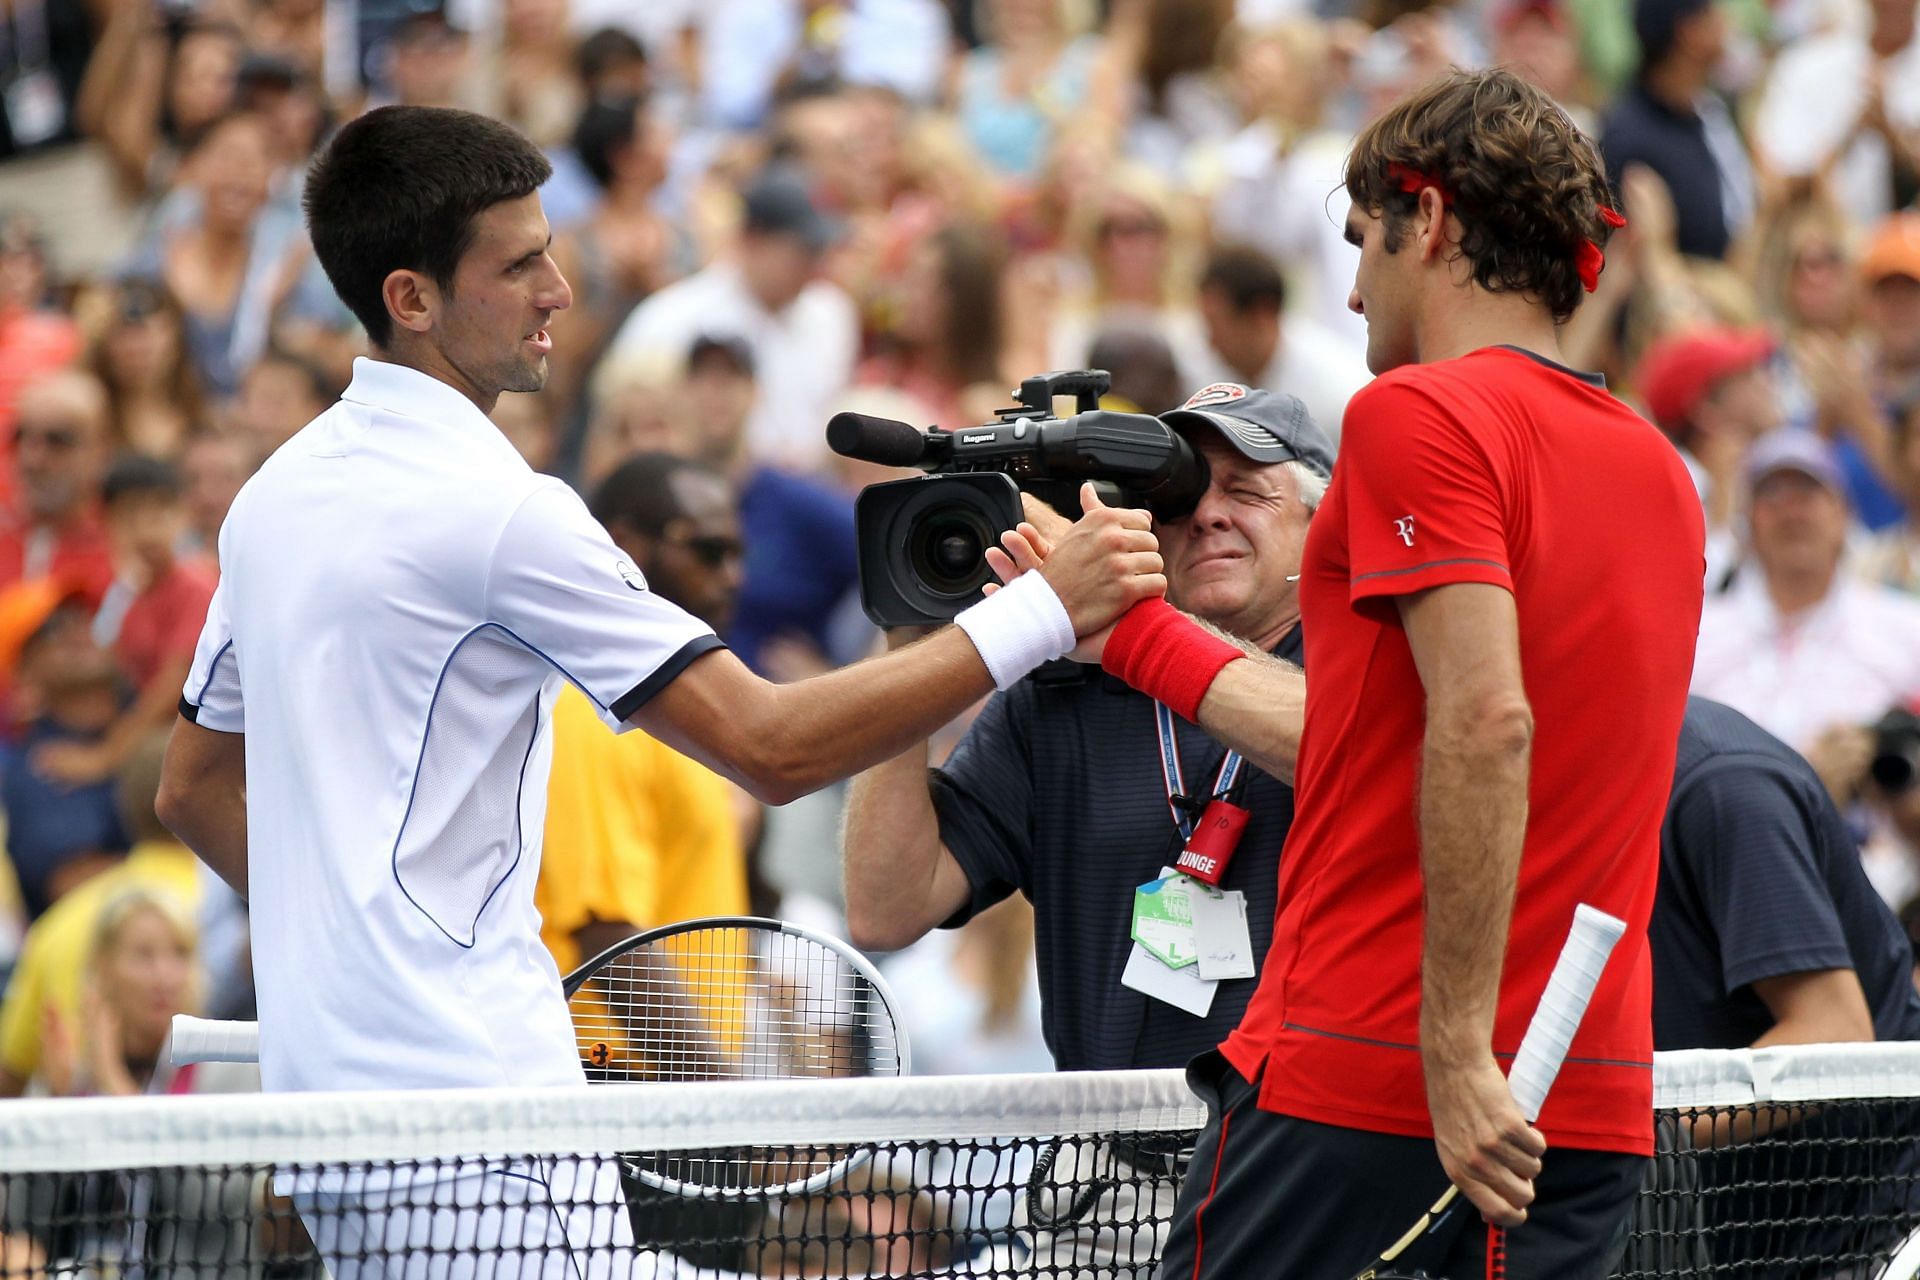 Roger Federer lost to Djokovic in the US Open semifinals